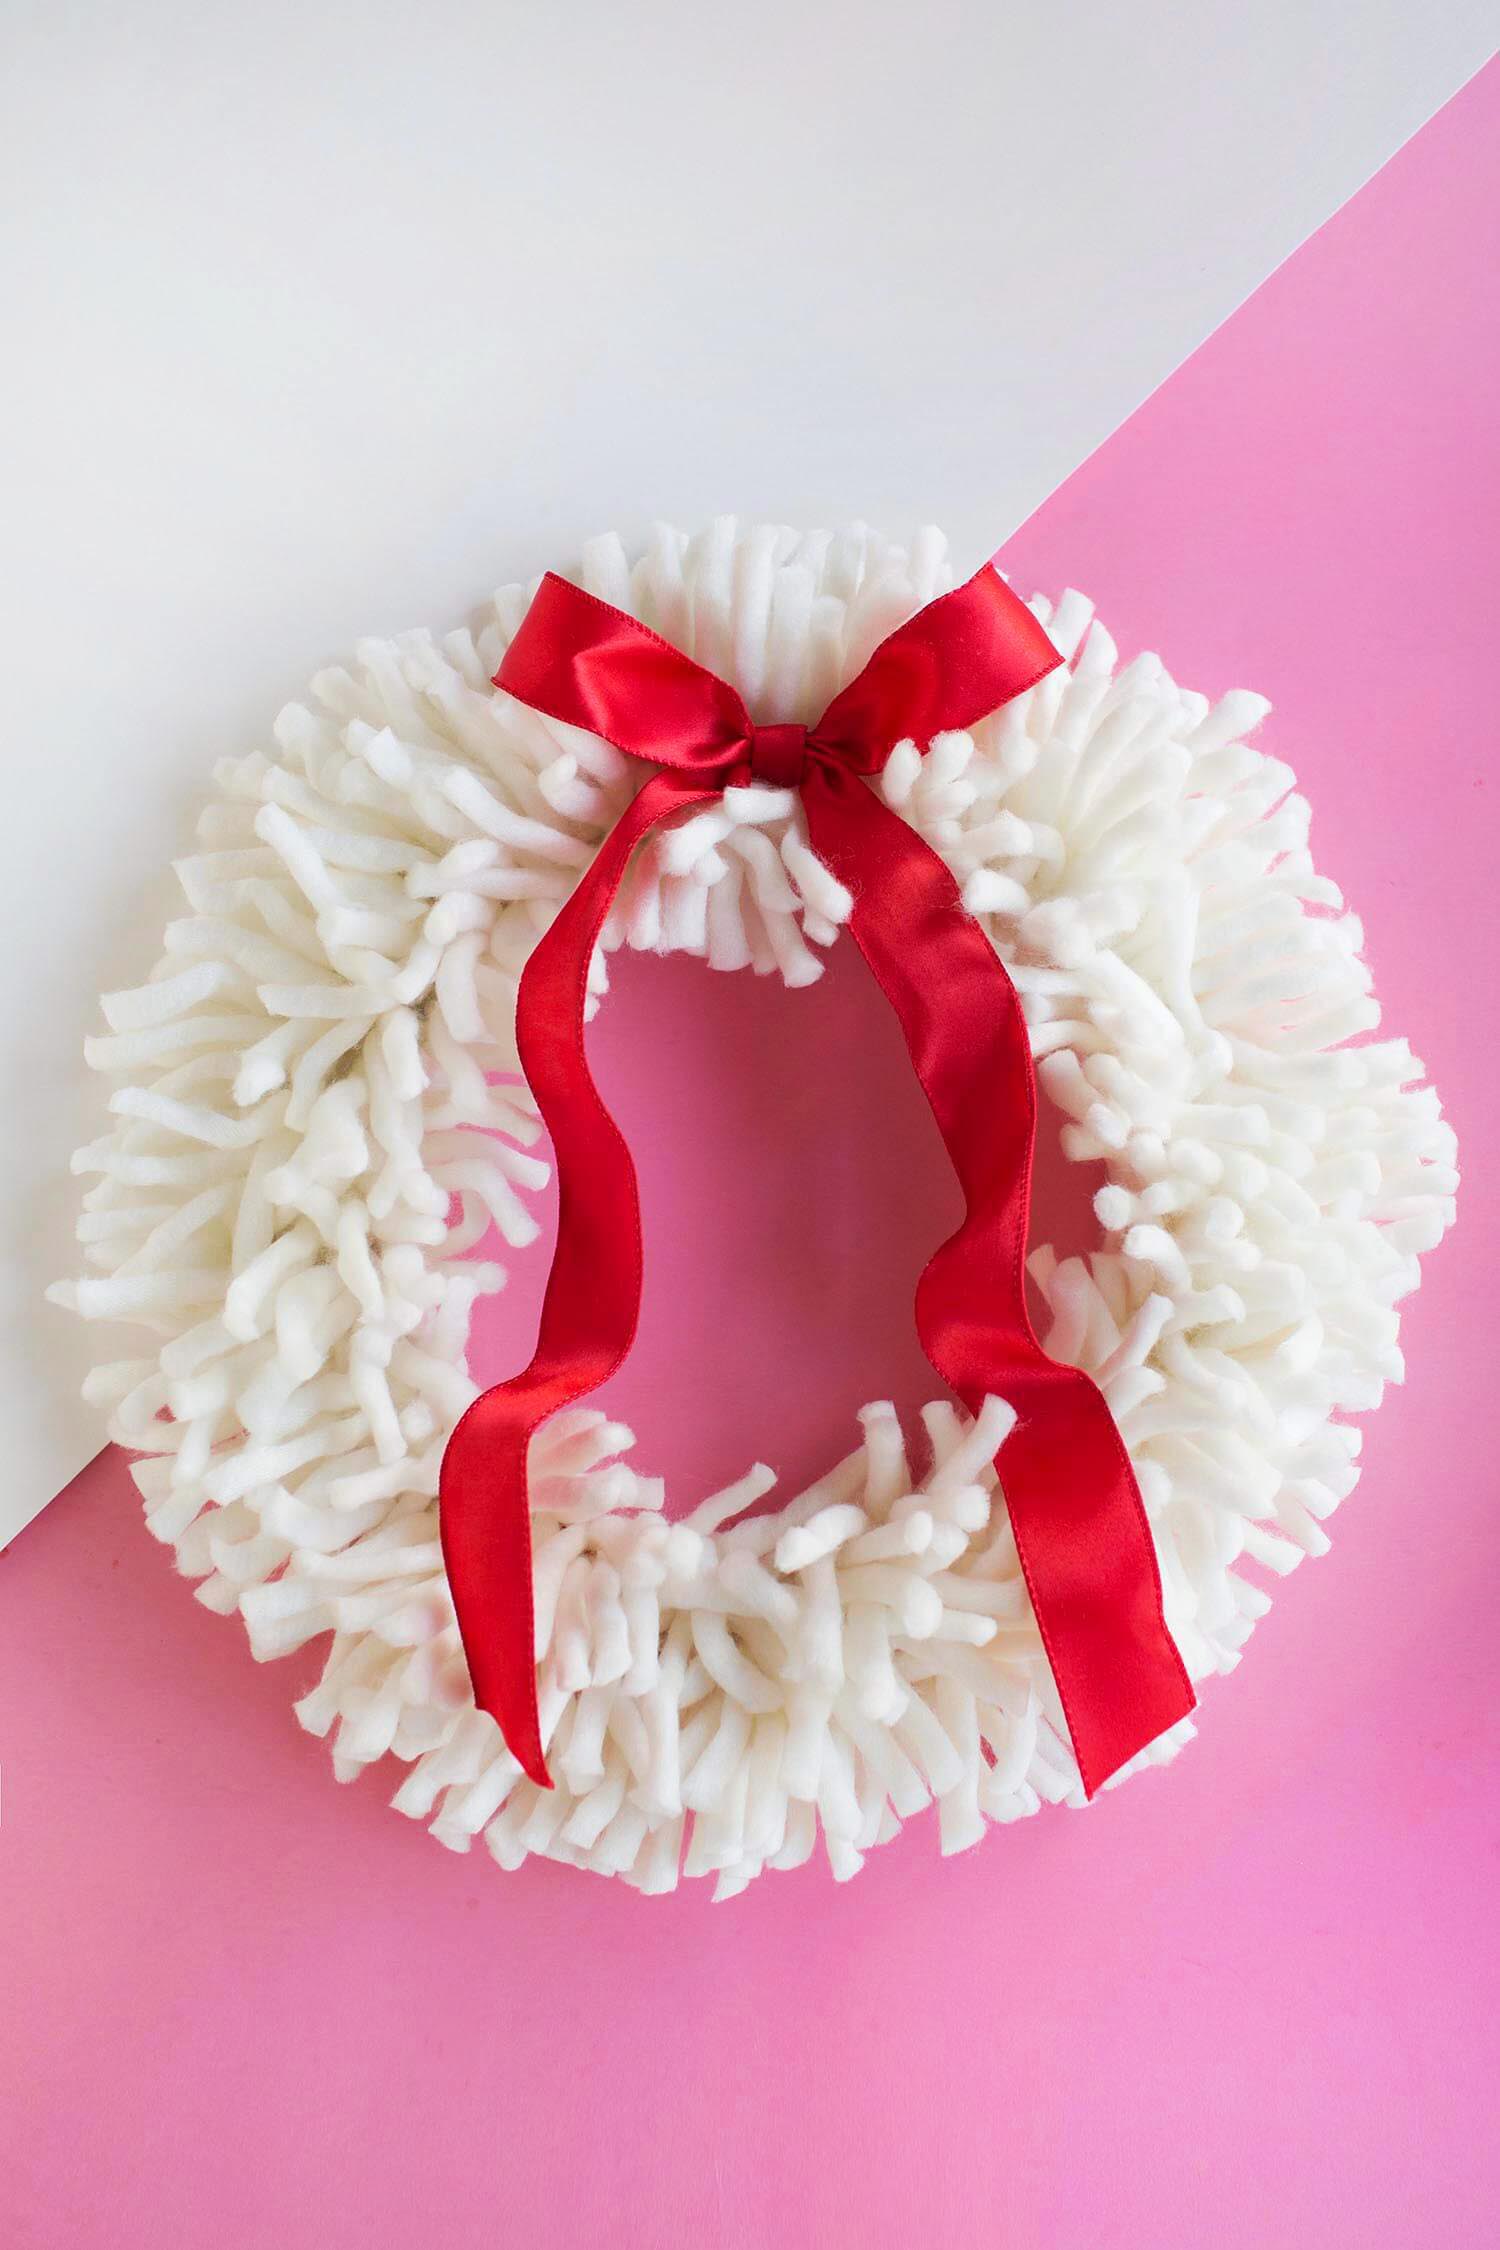 white yarn wreath with a red bow